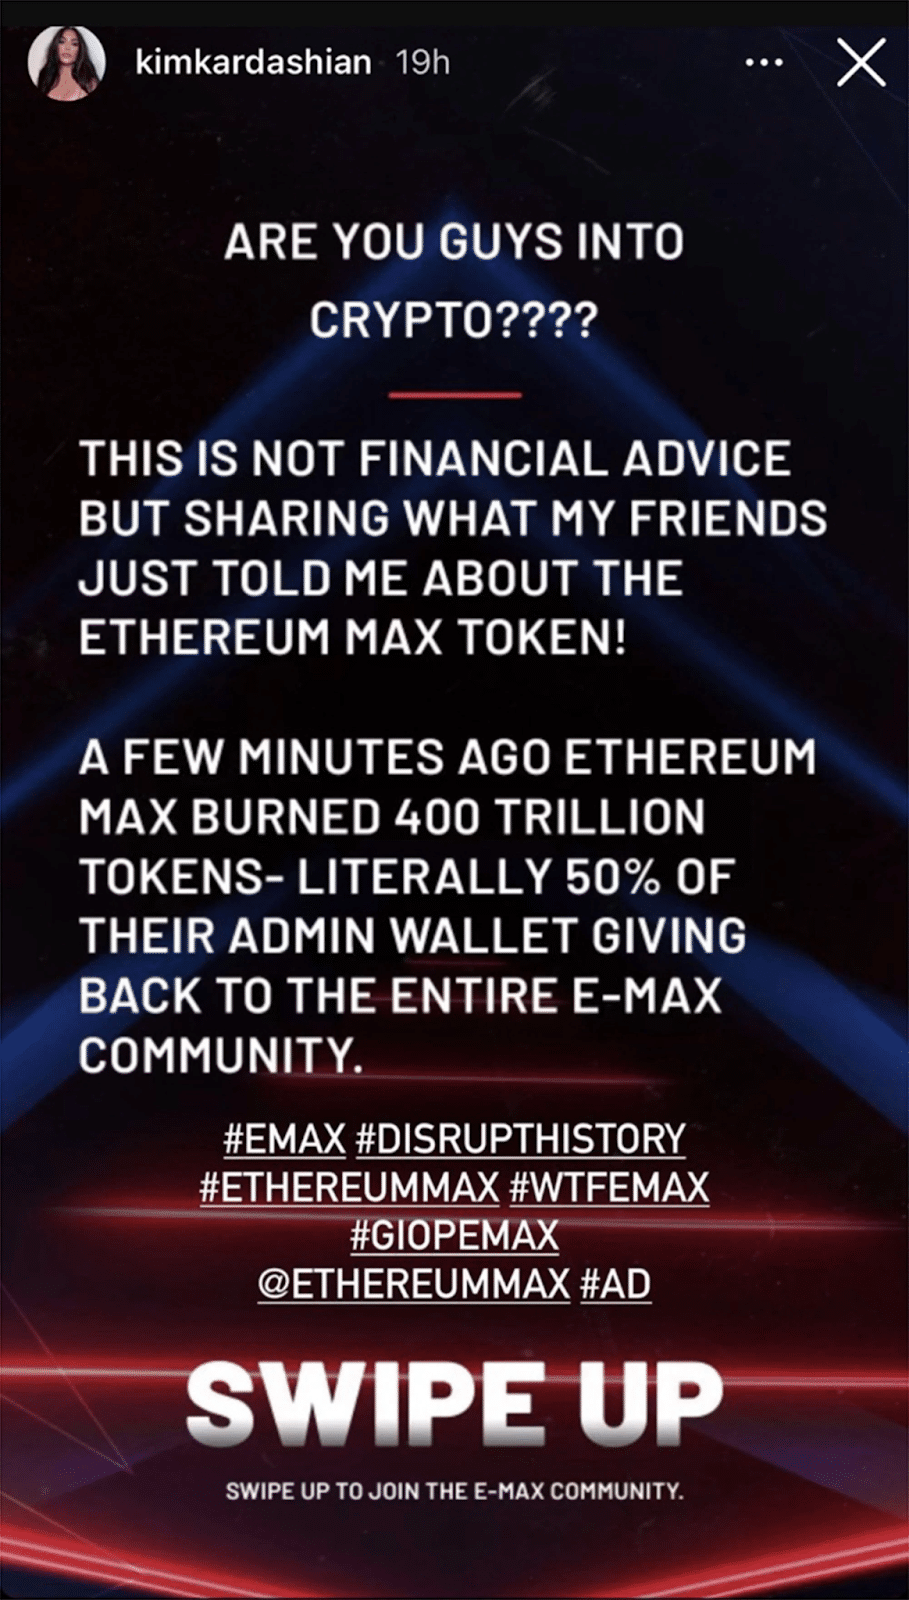 Kim Kardashian promoted Ethereum Max, which appeared to be a pump and dump scheme.